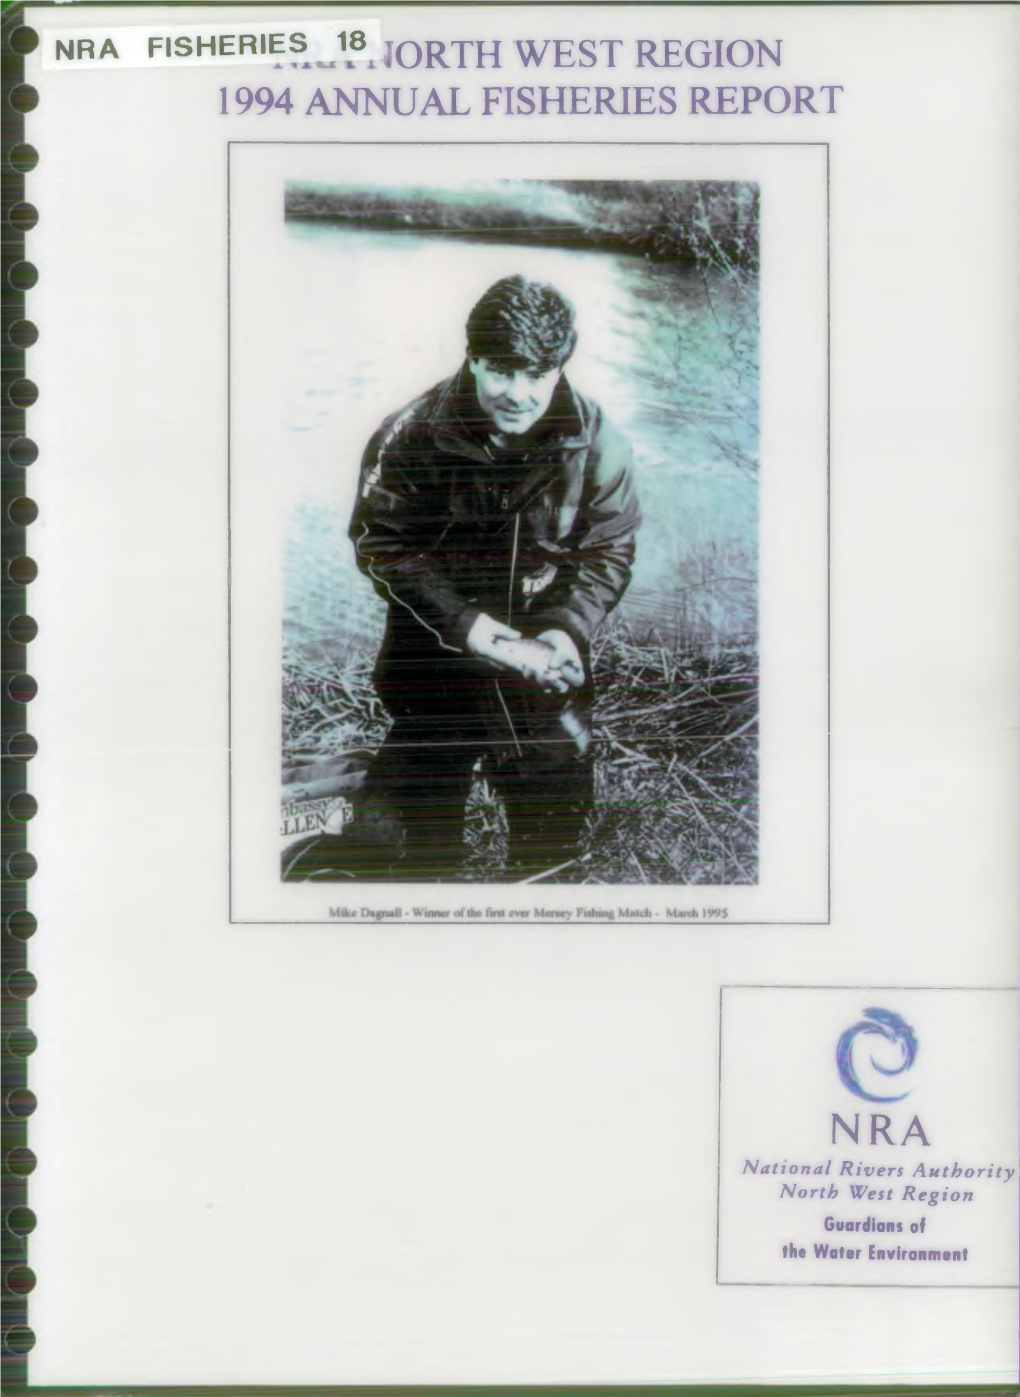 1994 Annual Fisheries Report